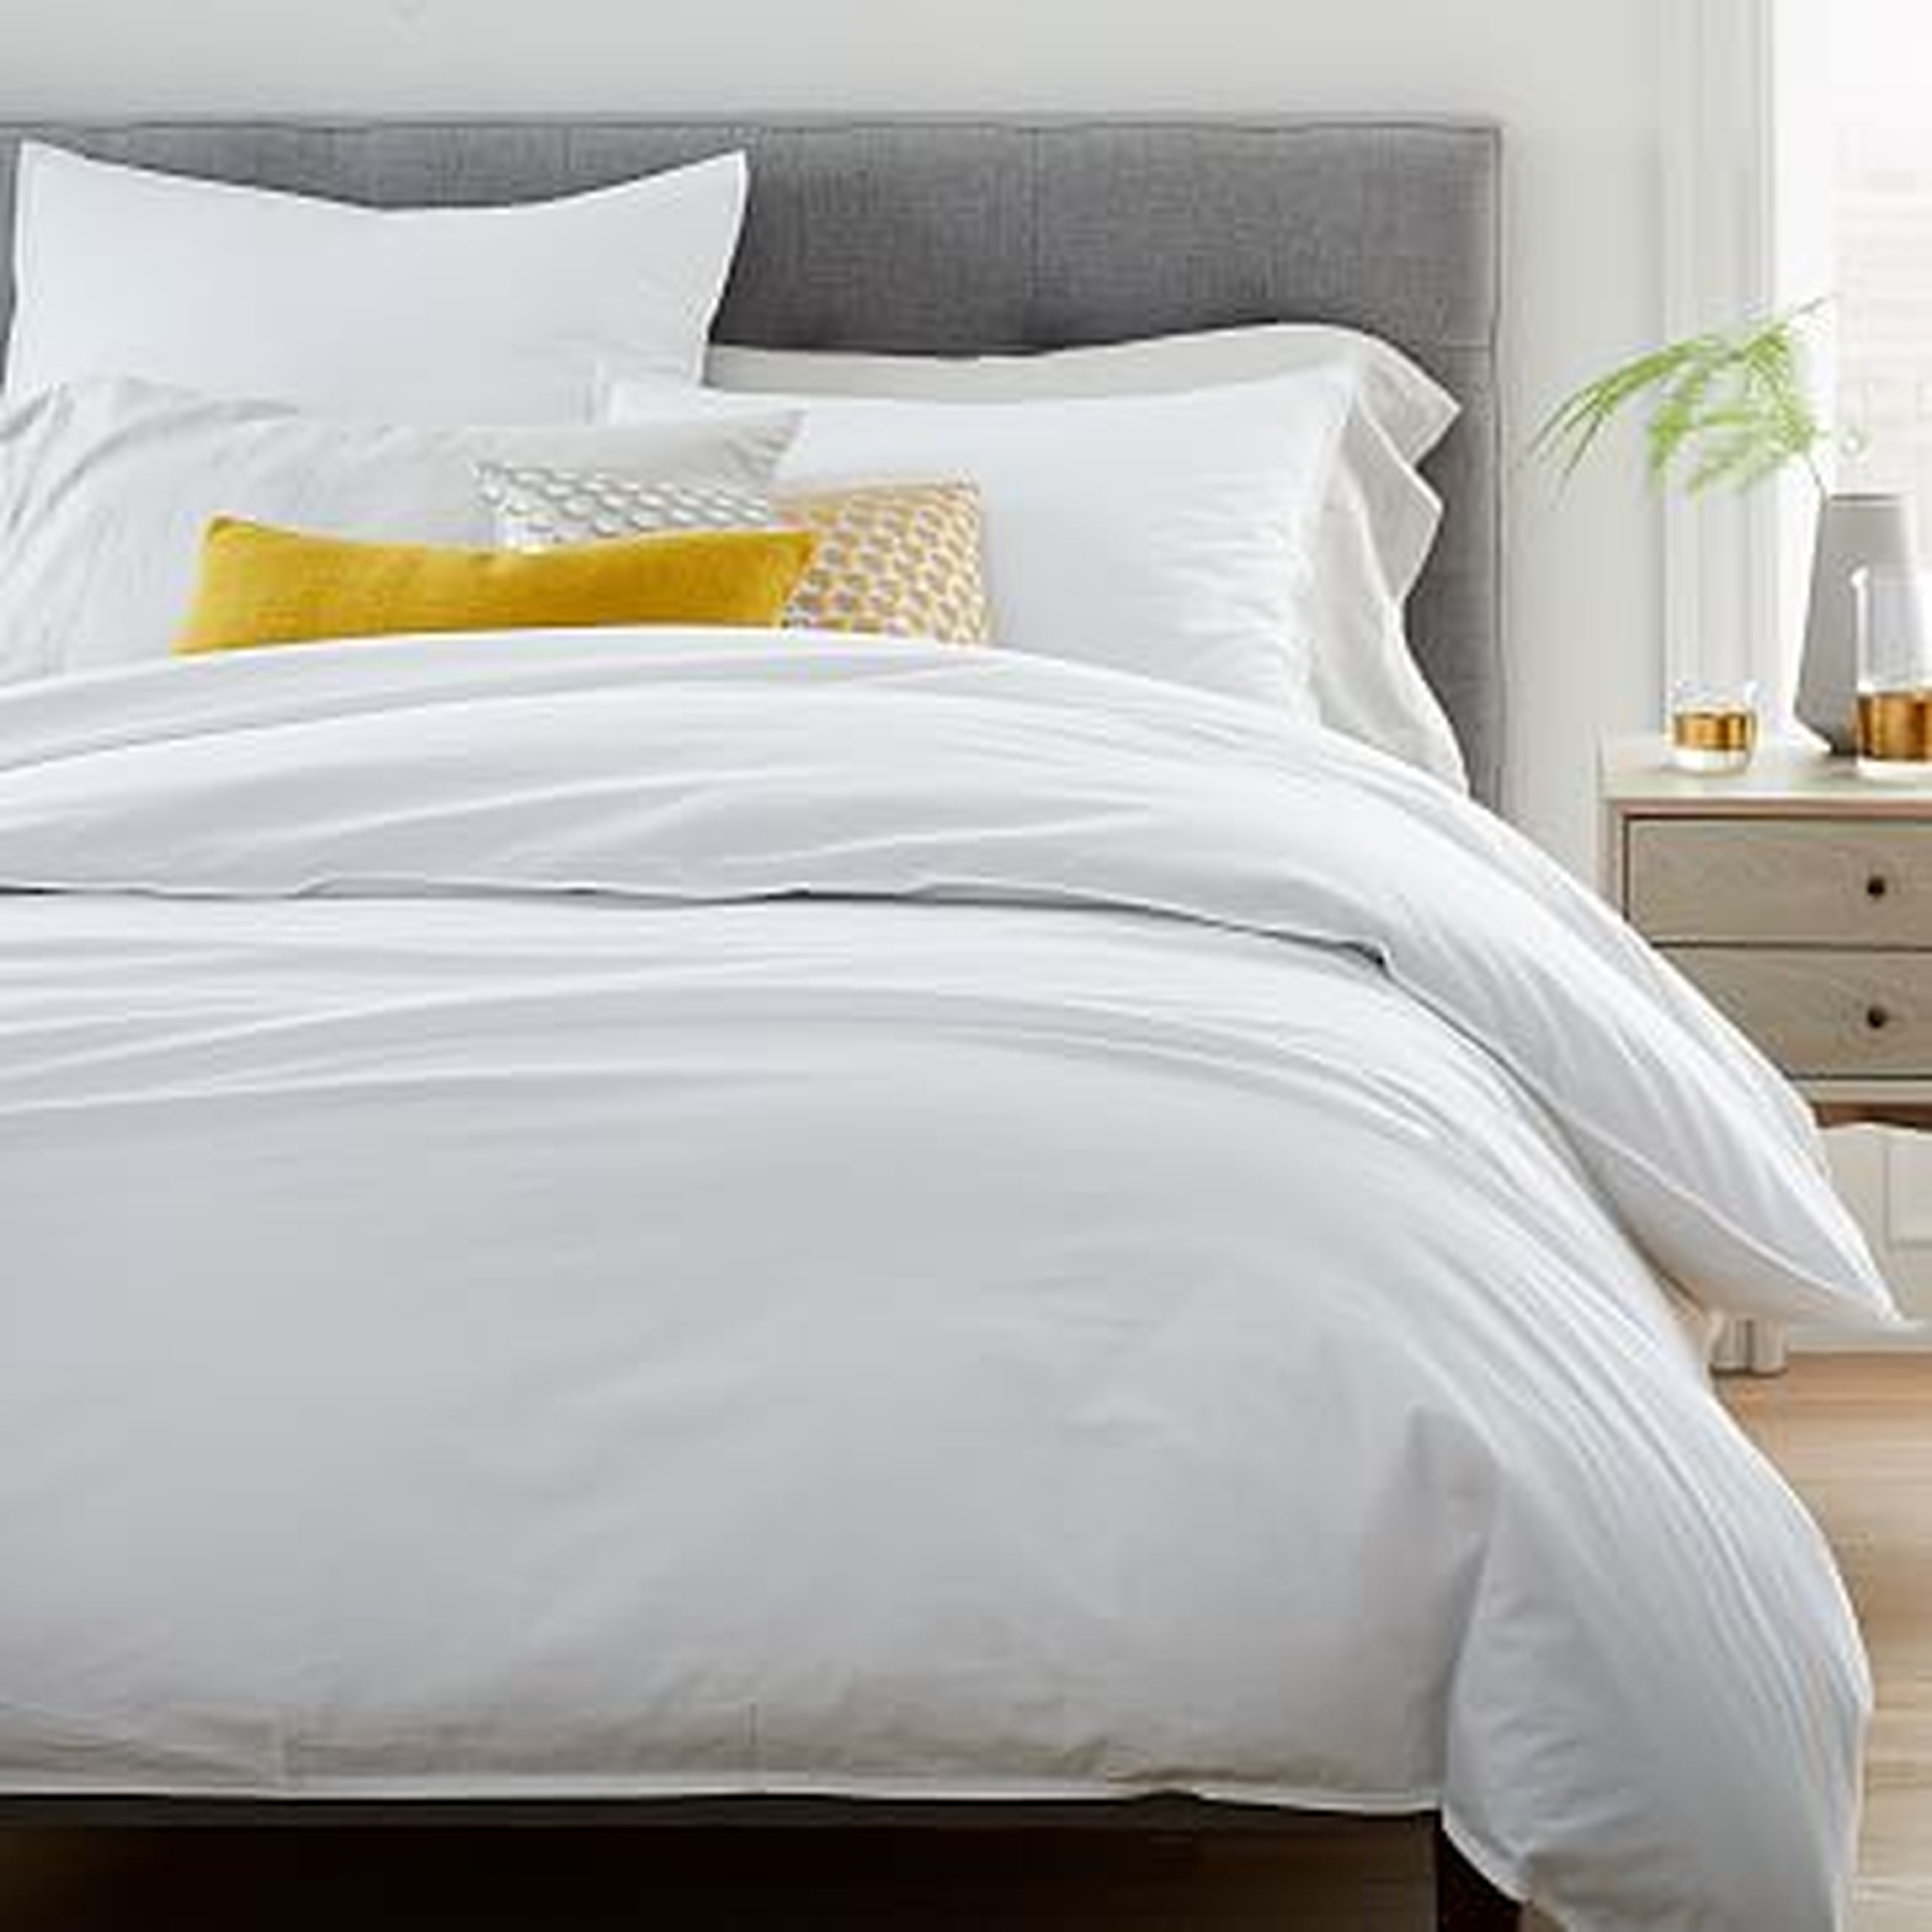 Organic Washed Cotton Duvet Cover, Full/Queen, Stone White - West Elm